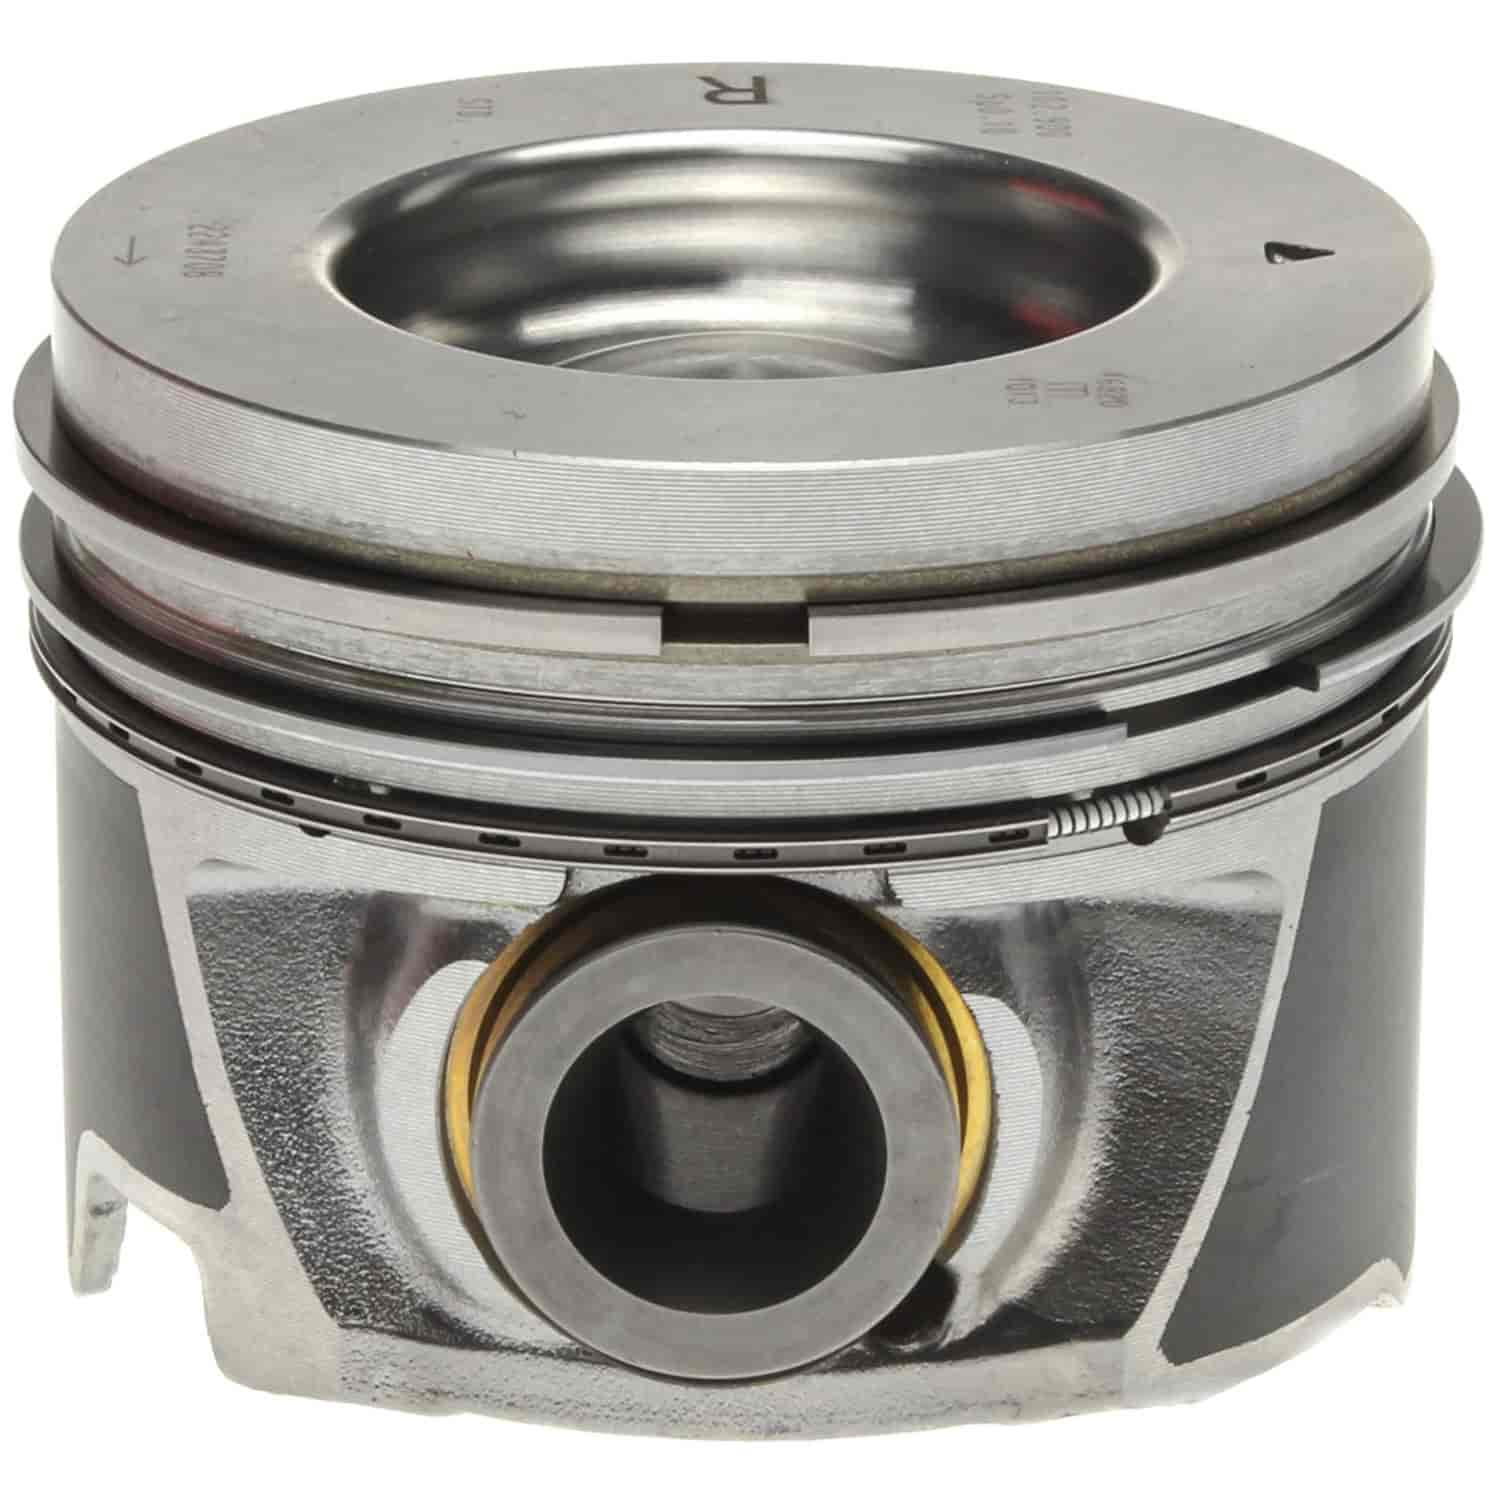 Piston and Rings Set 2006-2010 Chevy/GMC Duramax Diesel V8 6.6L Right Bank with 4.075" Bore (+.020")